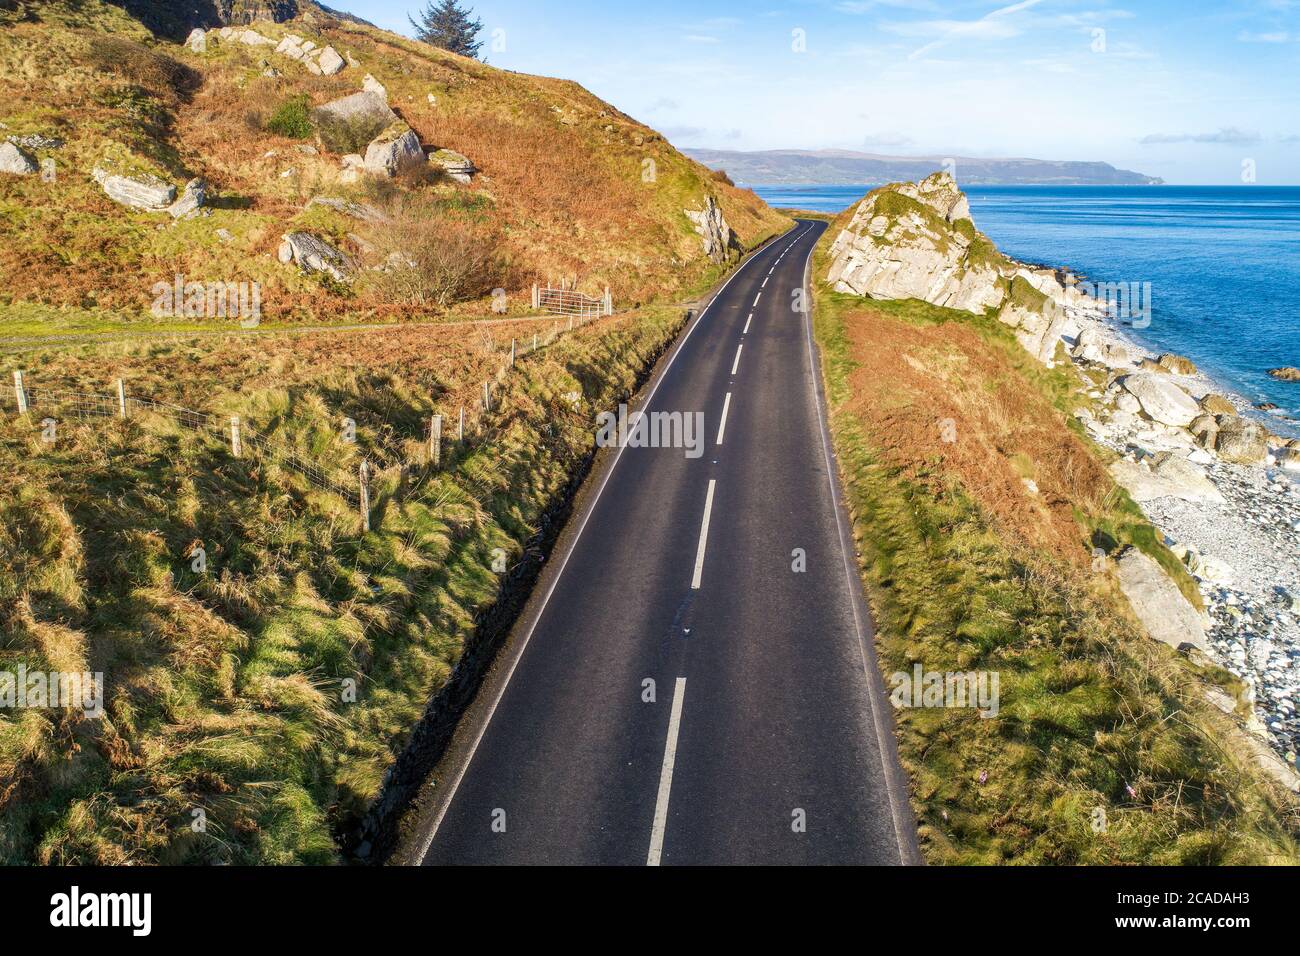 Causeway Coastal Route a.k.a Antrim Coast Road A2 on the Atlantic coast in Northern Ireland. One of the most scenic coastal roads in Europe. Aerial vi Stock Photo